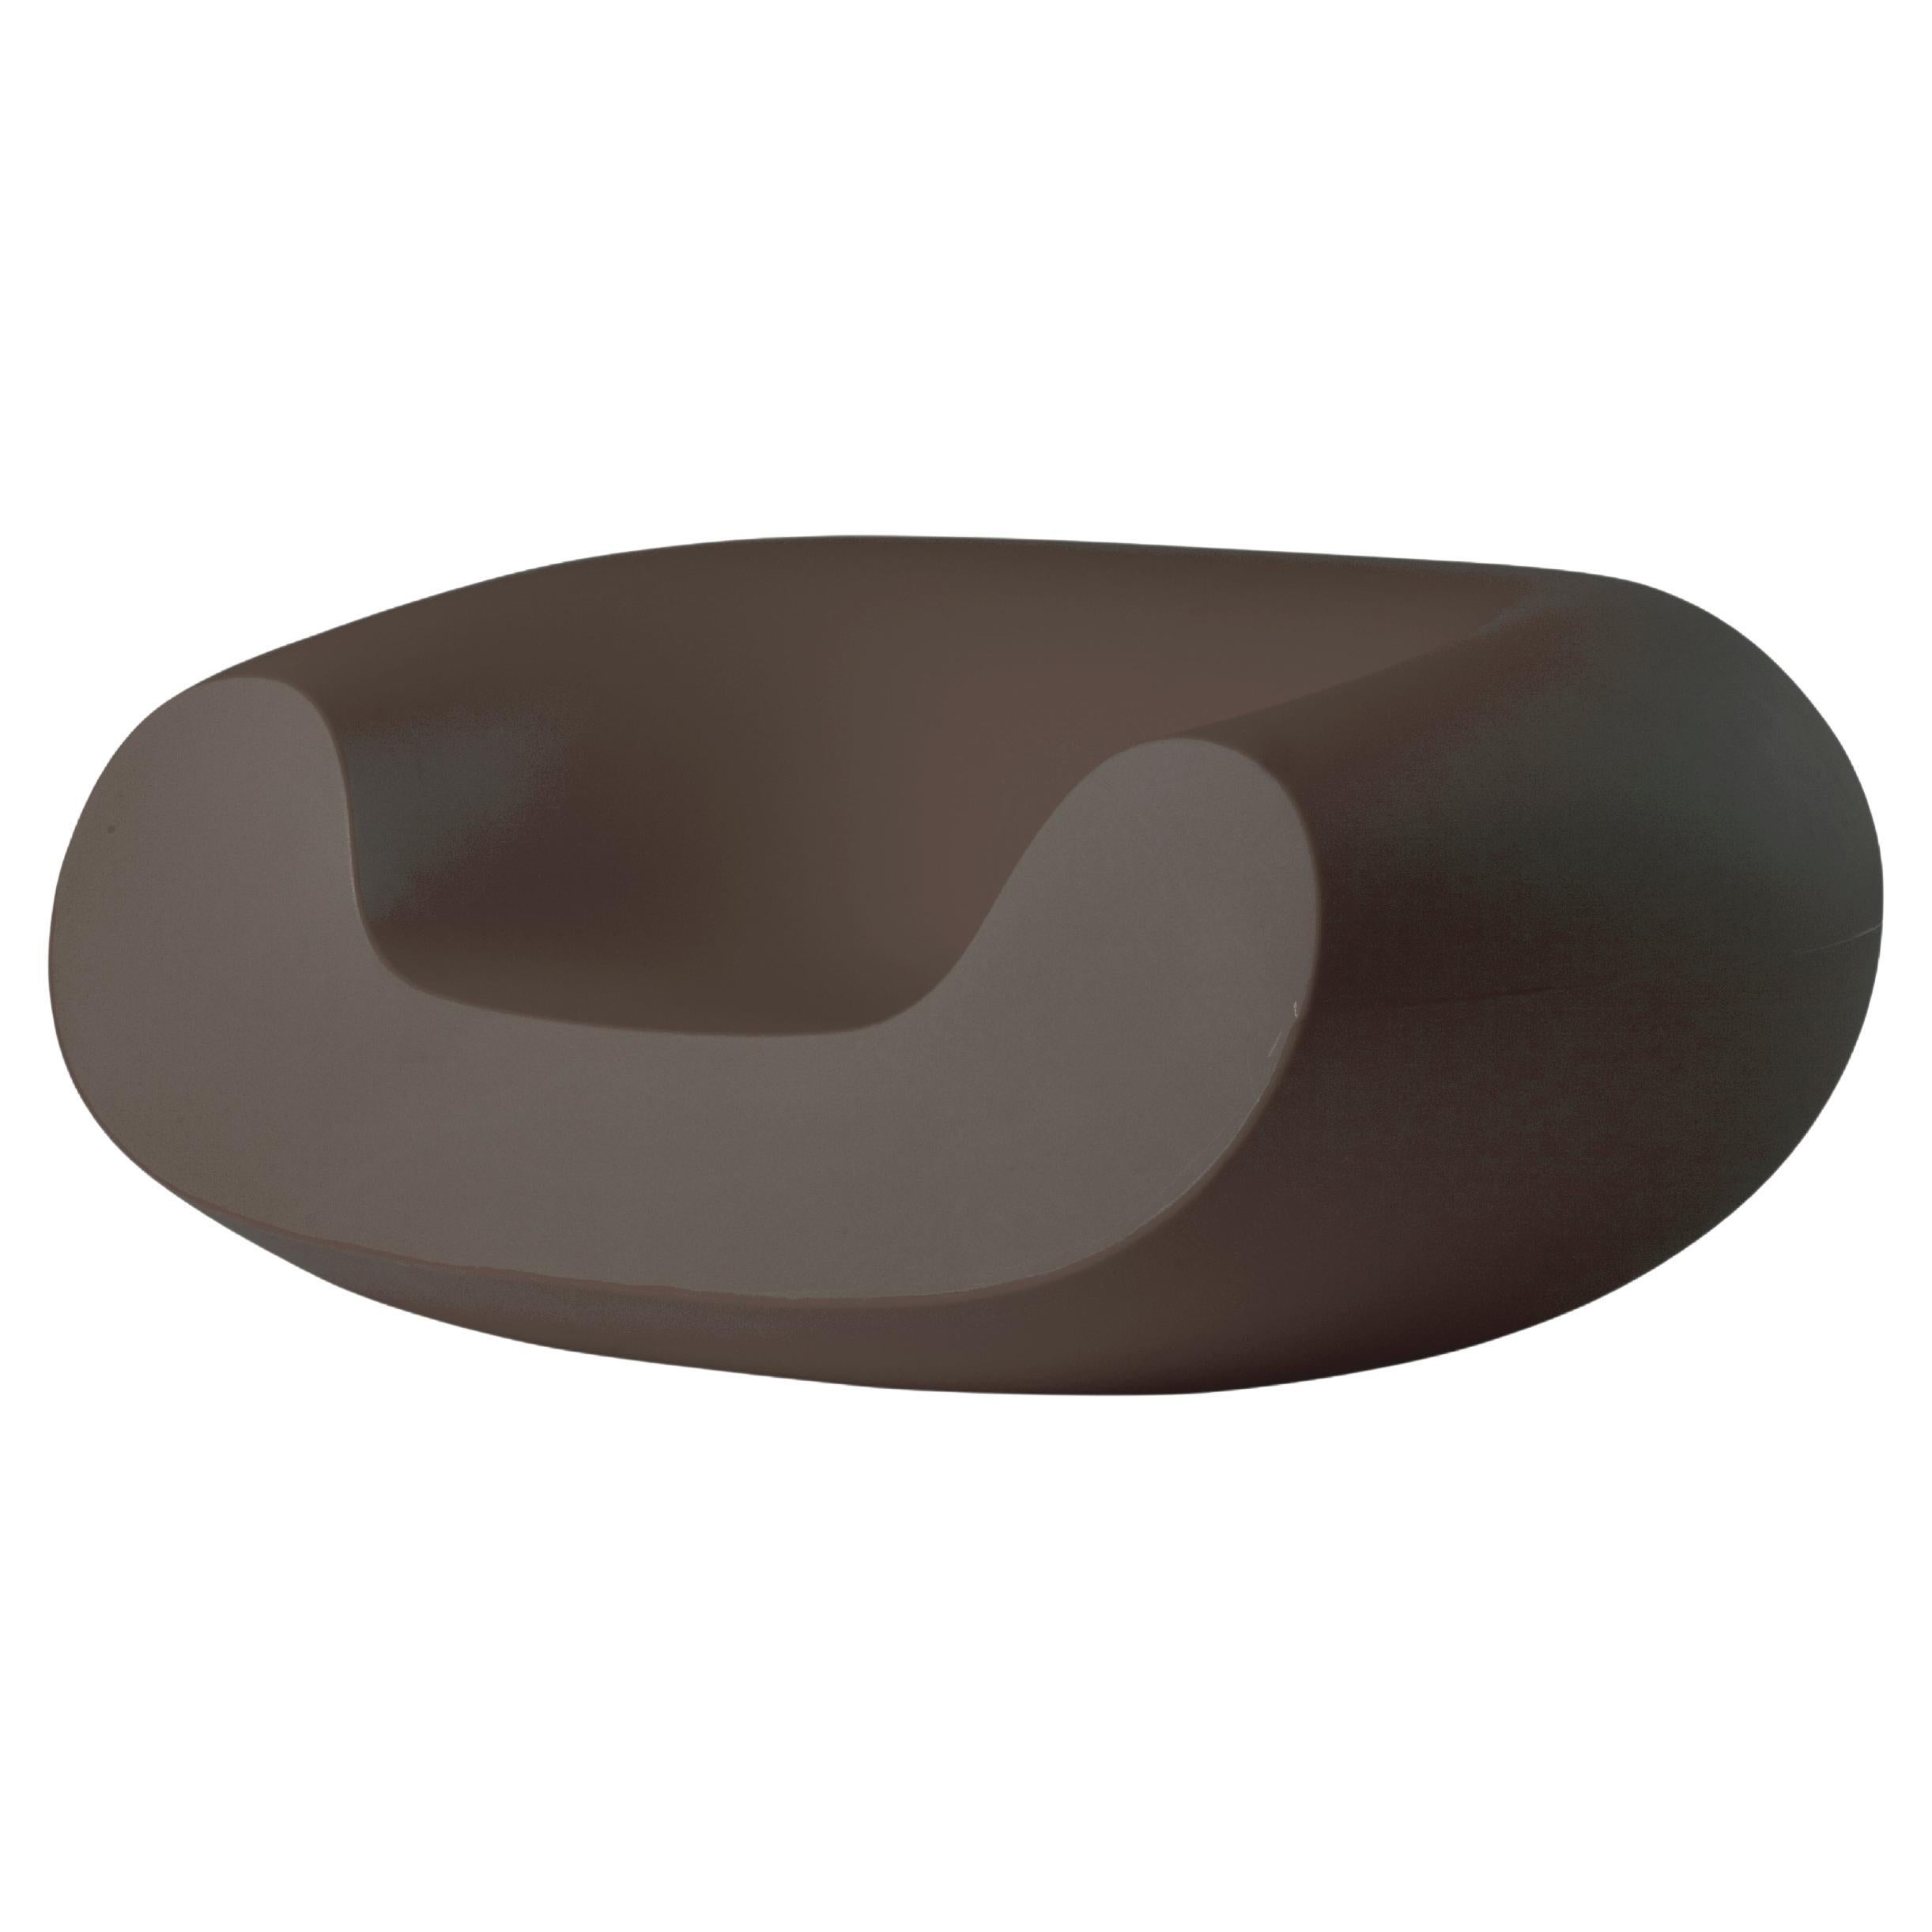 Slide Design Chubby Lounge Armchair in Chocolate Brown by Marcel Wanders